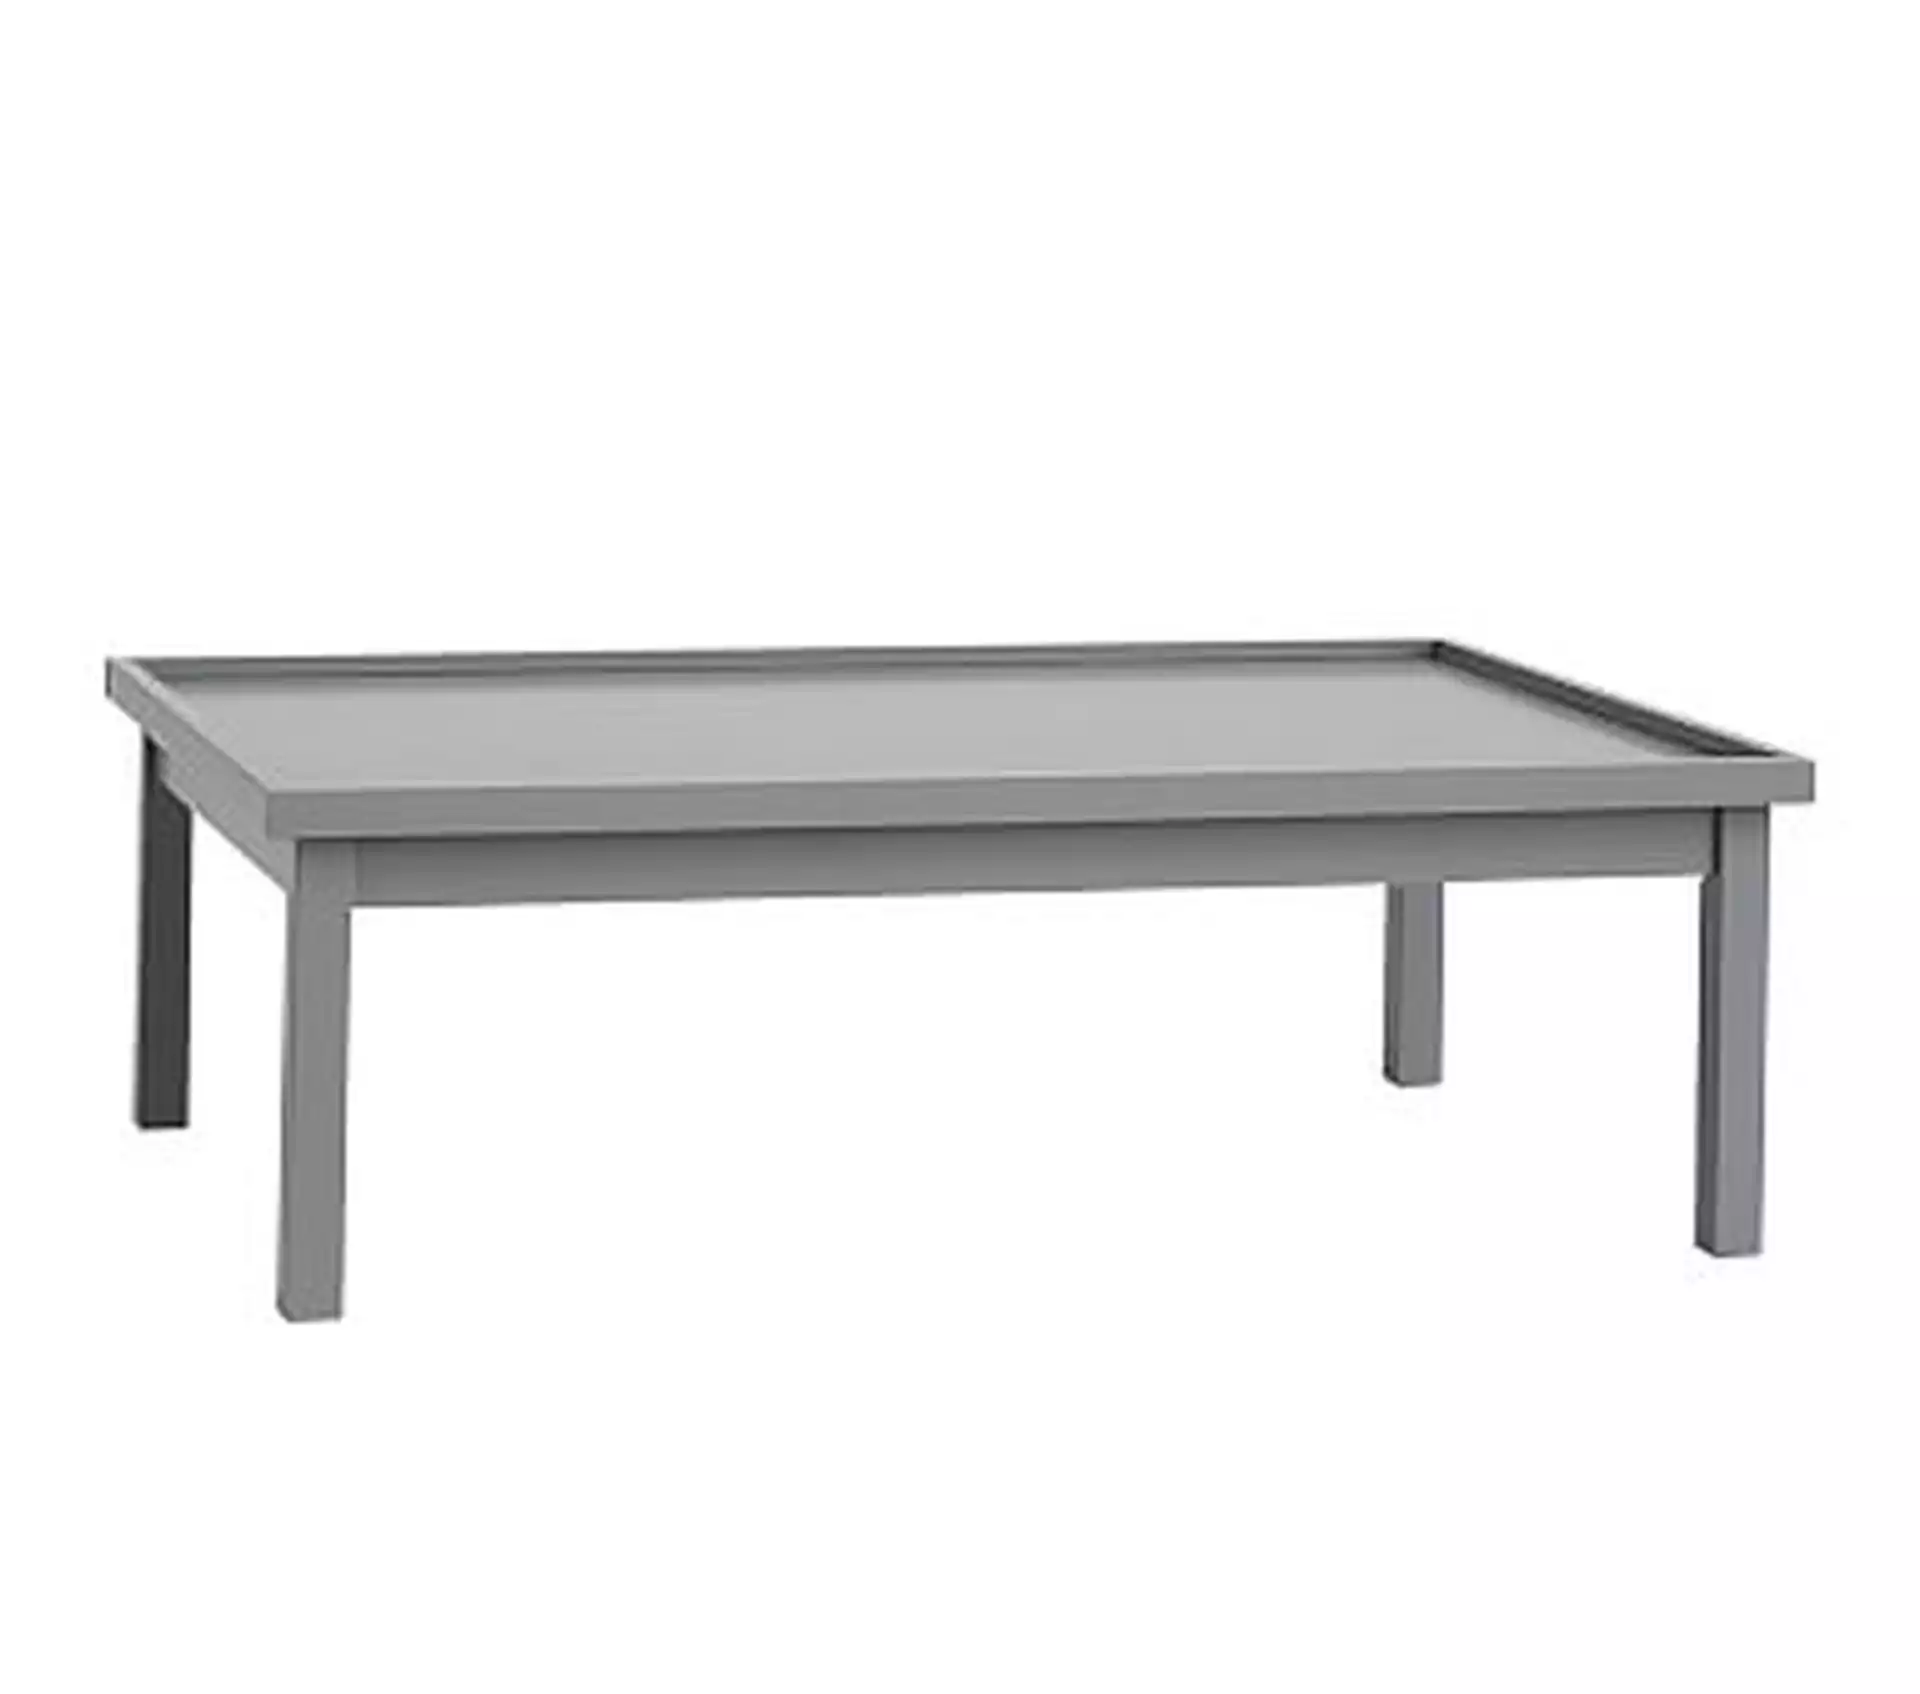 Carolina Activity Table with Low Legs, Charcoal